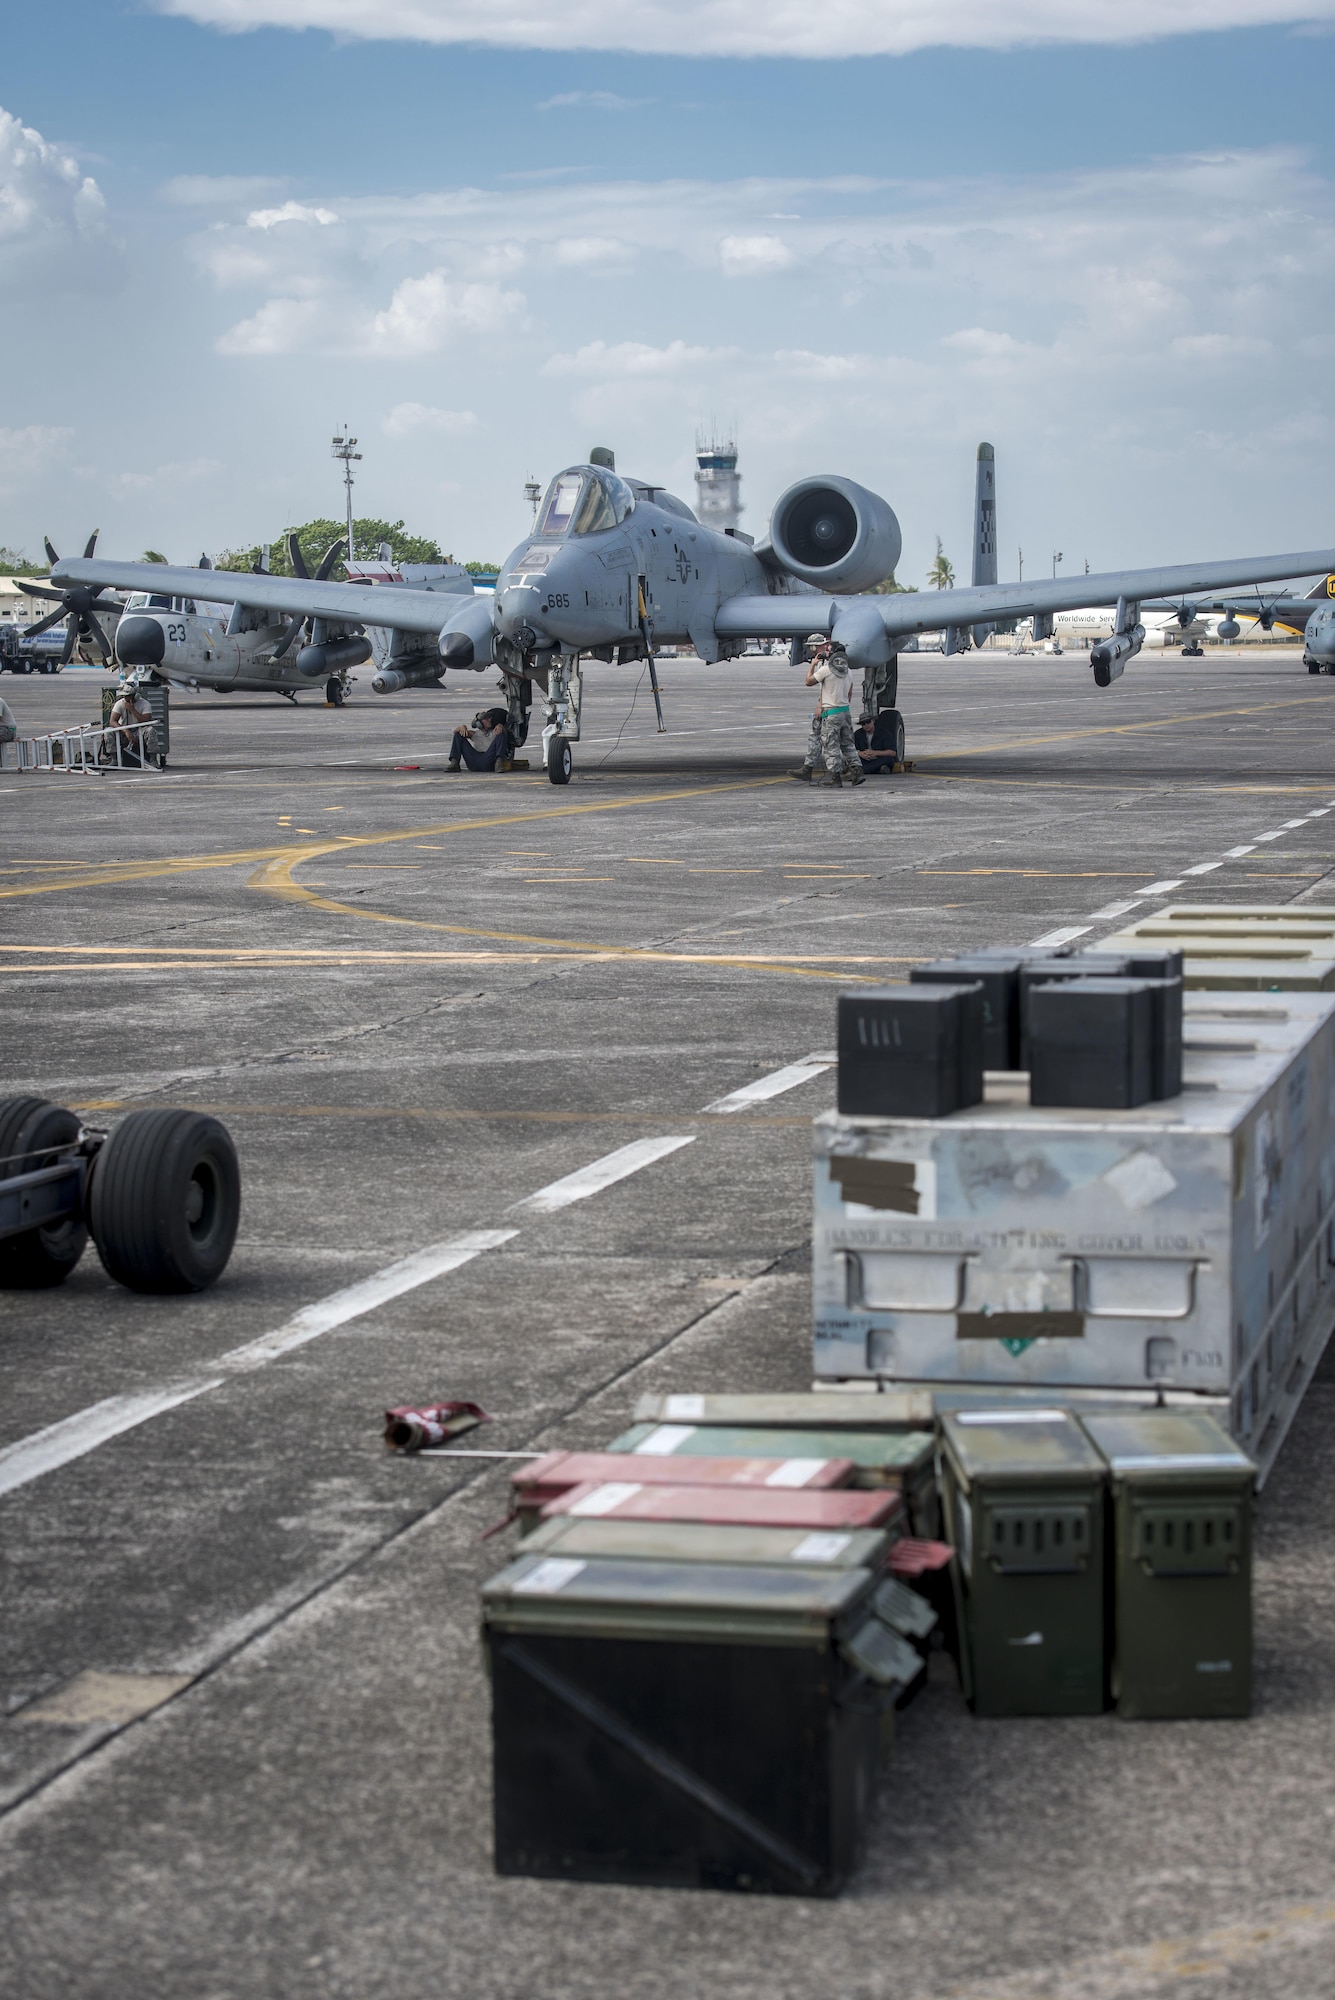 A U.S. Air Force A-10C Thunderbolt II, with the 51st Fighter Wing, Osan Air Base, Republic of Korea, is prepped for a mission out of Clark Air Base, Philippines, April 19, 2016. The A-10C is here as part of a newly stood up Air Contingent conducting operations ranging from air and maritime domain awareness, personnel recovery, combating piracy, and assurance all nations have access to the regional air and maritime domains in accordance with international law. The A-10 is capable of loitering close to the surface for extended periods to allow for excellent visibility over land and sea domains. Through these missions, U.S. Pacific Command and the Philippine military seek to provide transparent maritime situational awareness while ensuring safety of military and civilian operations in international waters and airspace. (U.S. Air Force photo by Staff Sgt. Benjamin W. Stratton)